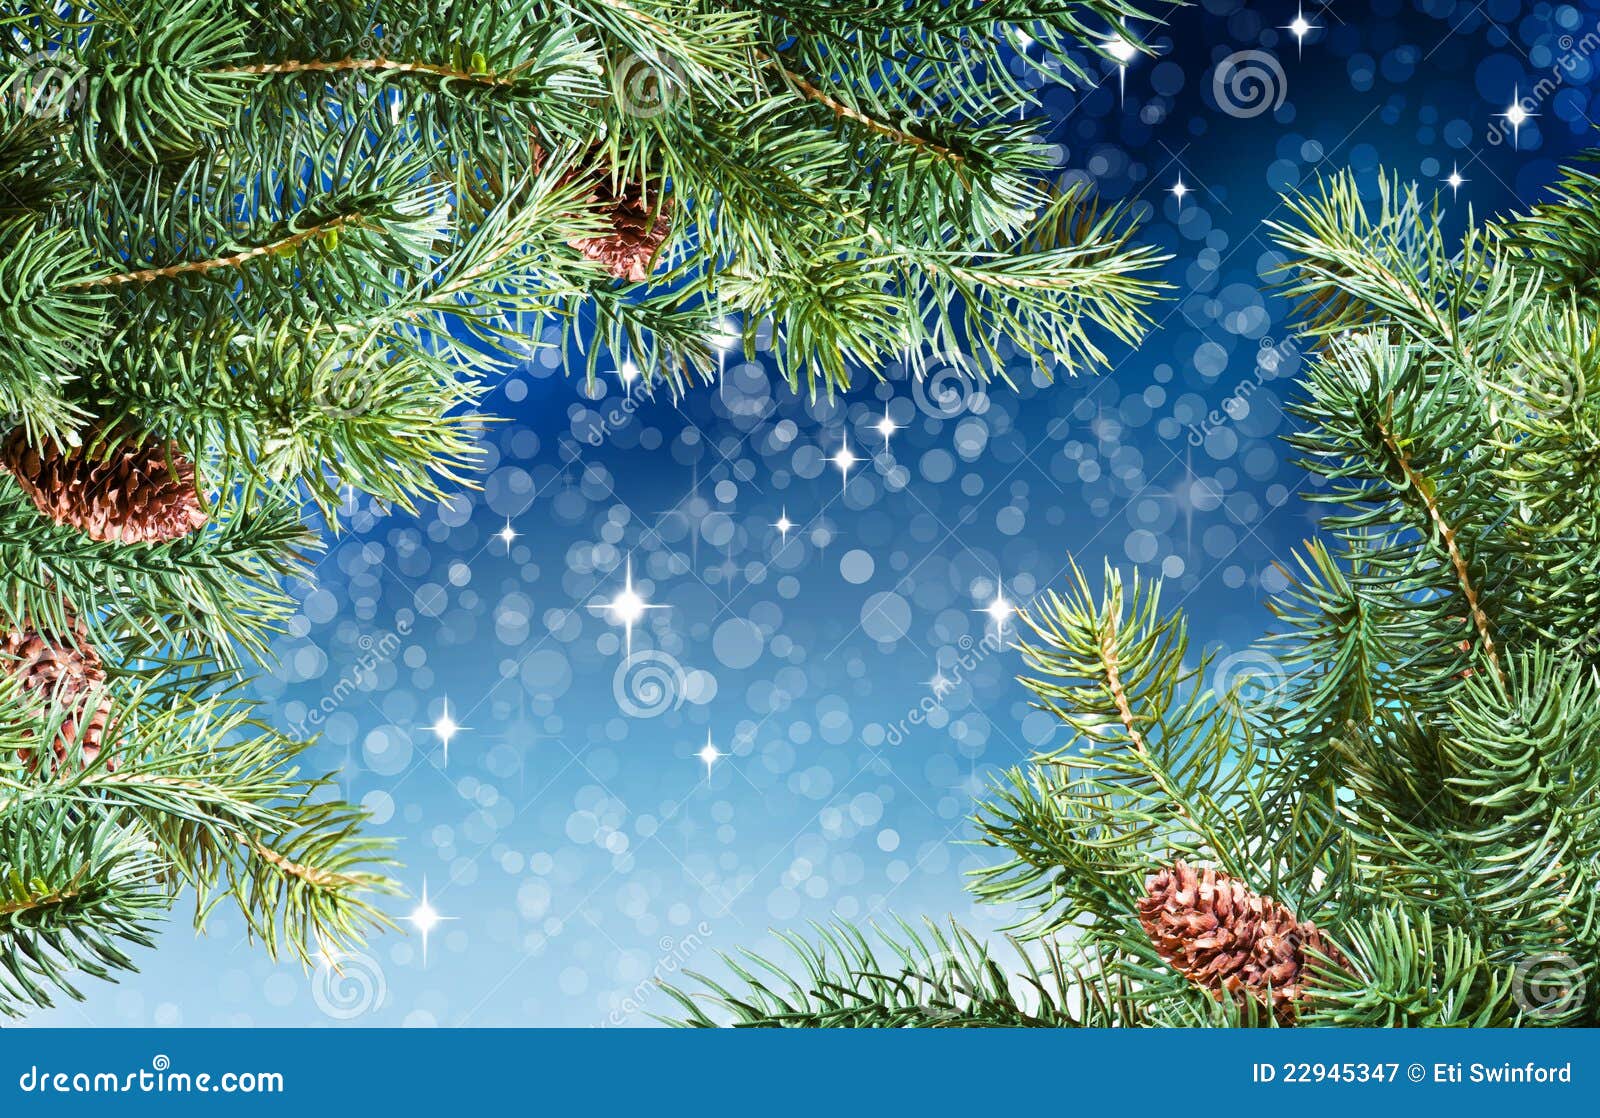 Christmas Tree Branches Royalty Free Stock Photography - Image: 22945347